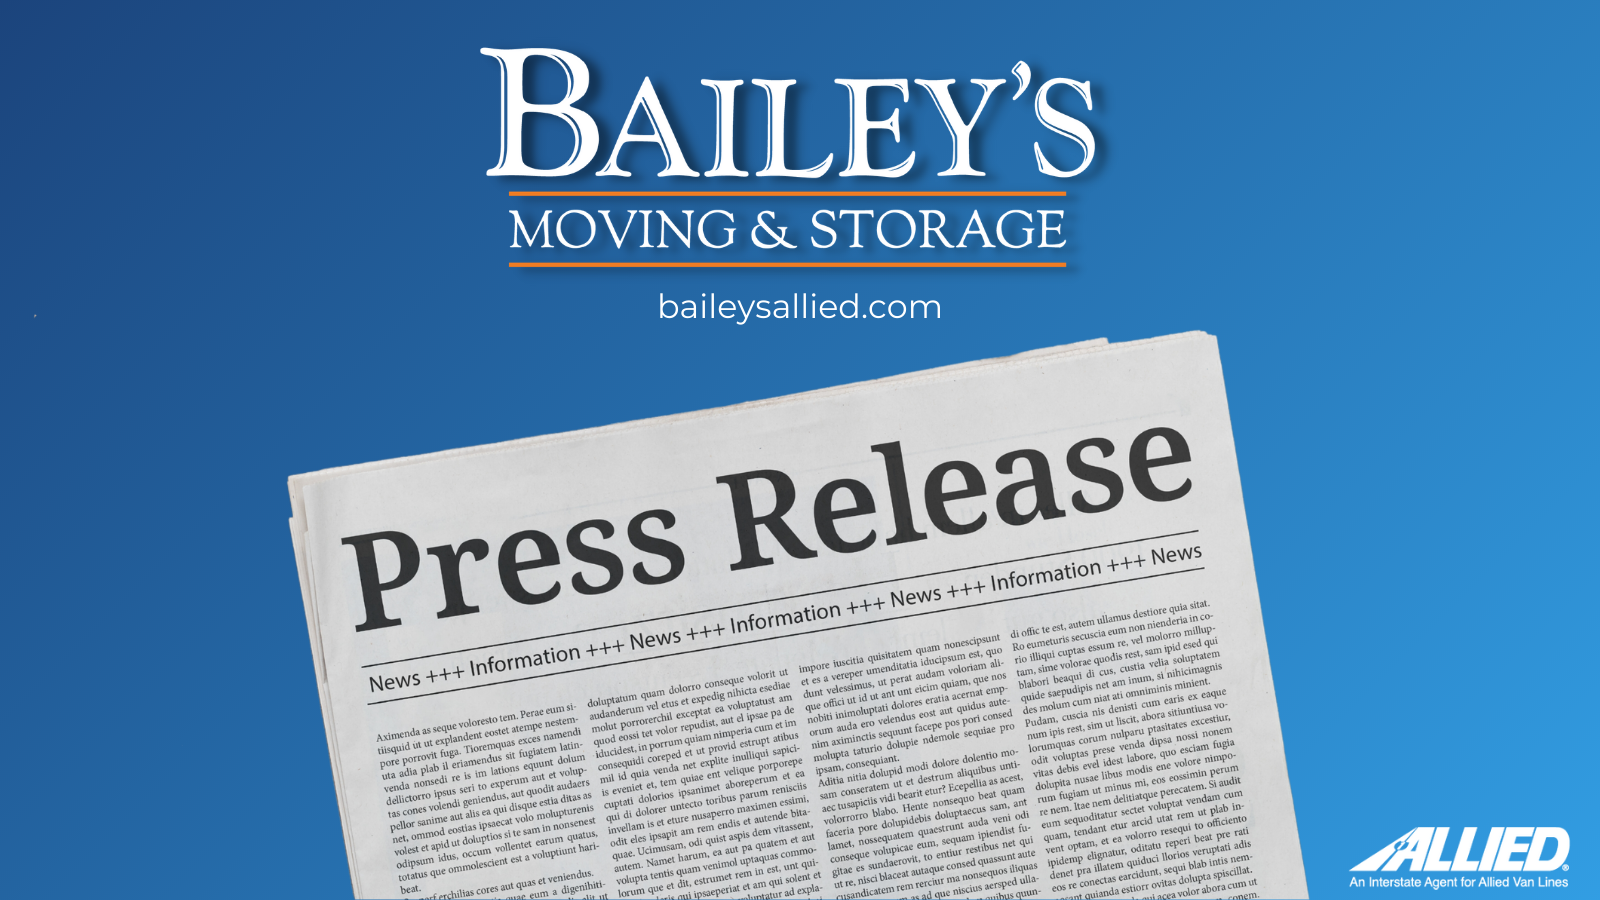 Bailey's Moving and Storage logo with newspaper image that says "Press Release"